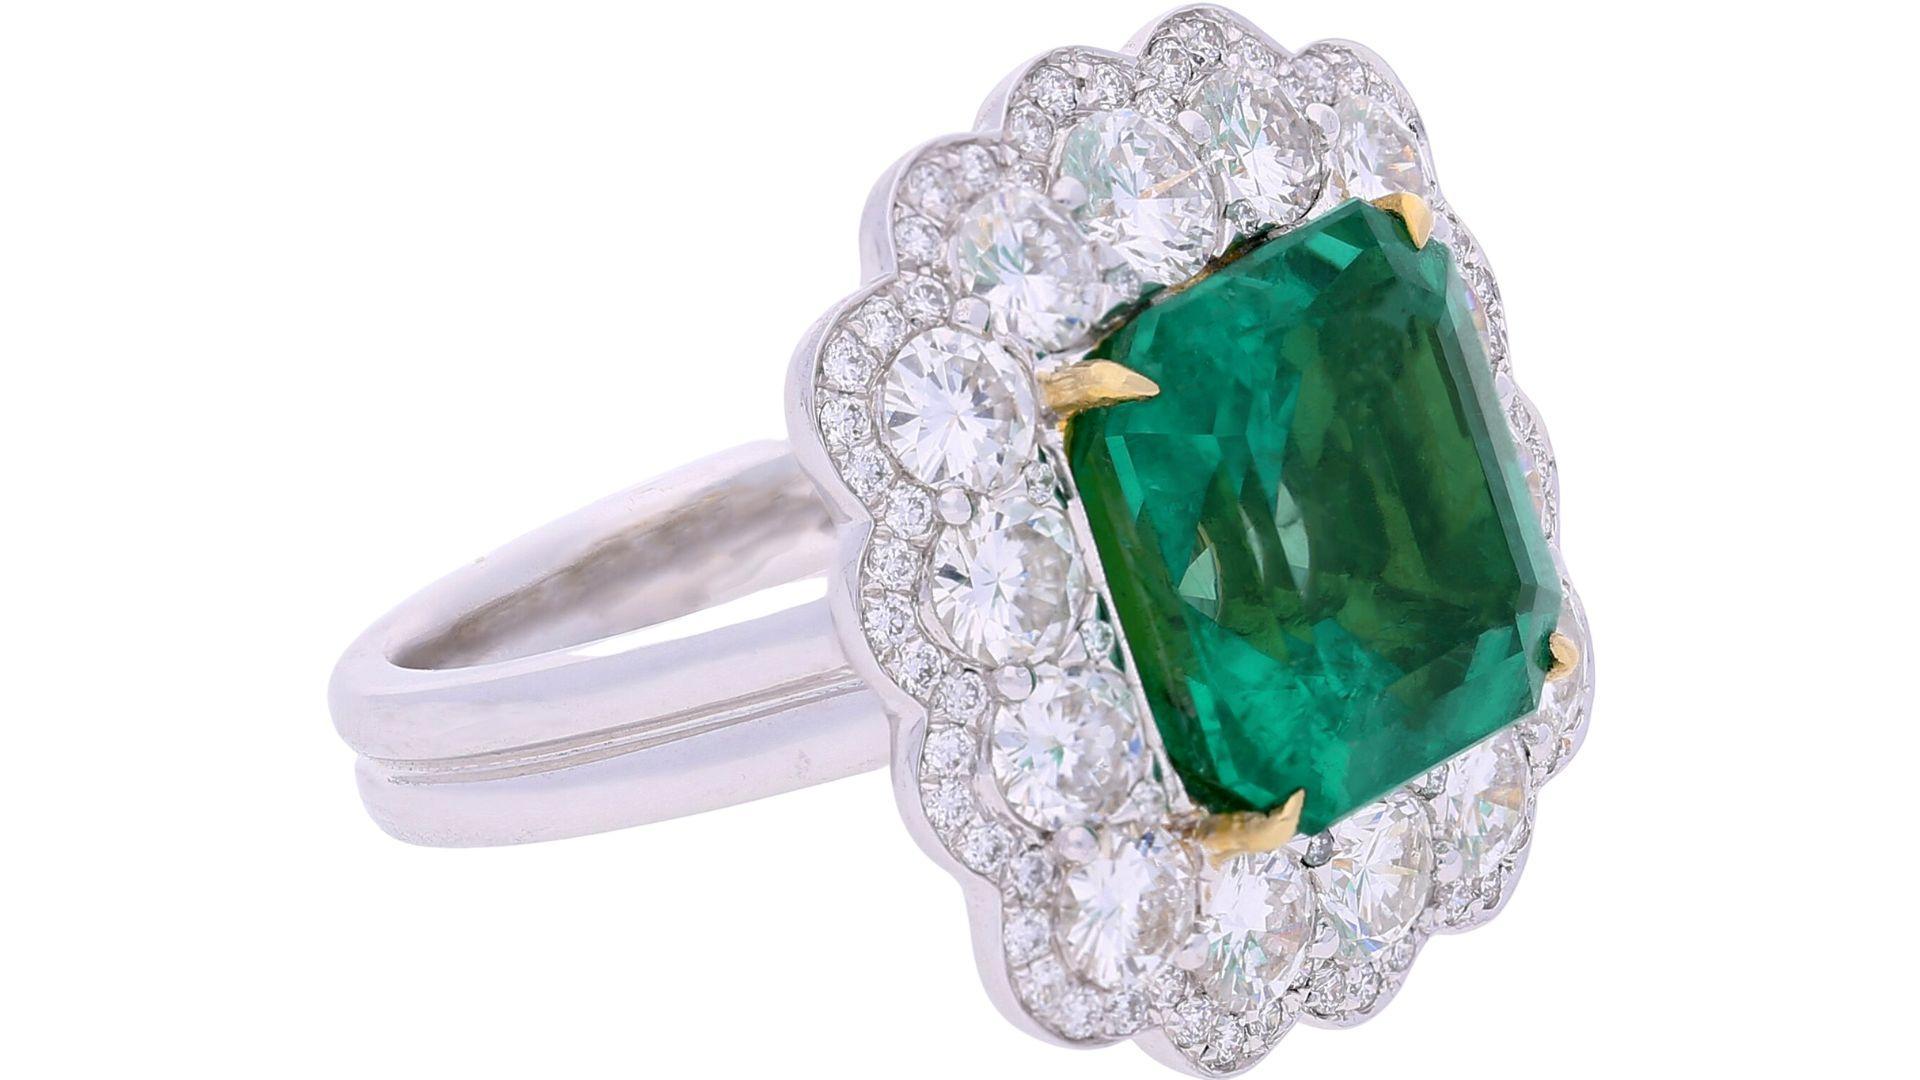 GRS Certified 8.04 carat octagonal emerald cut minor-moderate oil Colombian natural emerald & diamond halo ring. 

Details: 
✔ Item Type: Ring 
✔ Metal: 18k Yellow & White Gold 
)
✔ Weight: 10.89 grams
✔ Setting: Prong in yellow gold, diamonds held